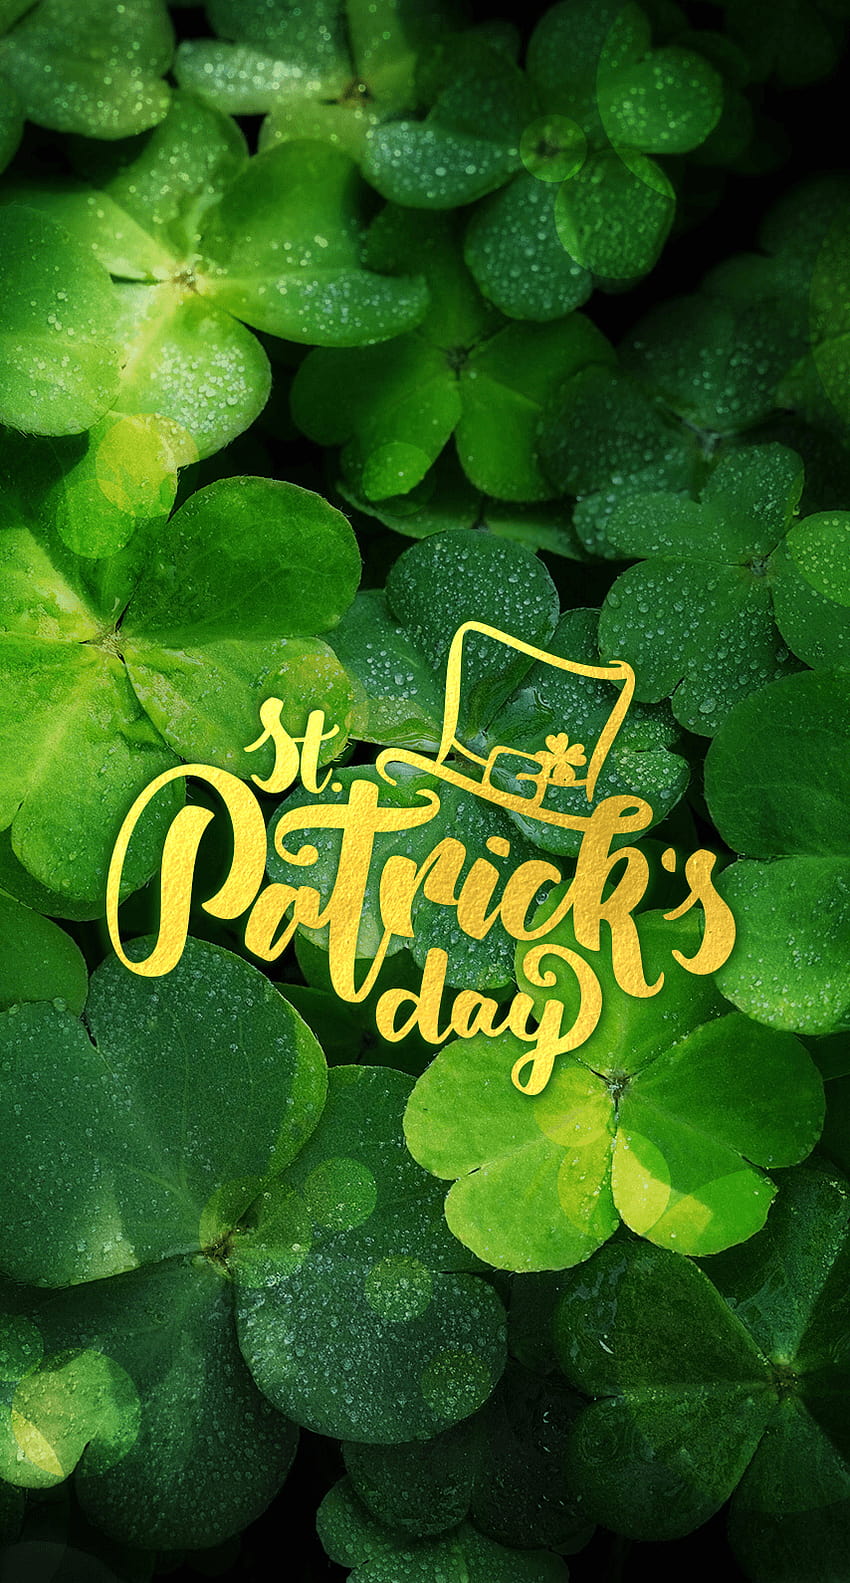 Best 10 Iphone Wallpapers for St Patricks Day 2023  Do It Before Me